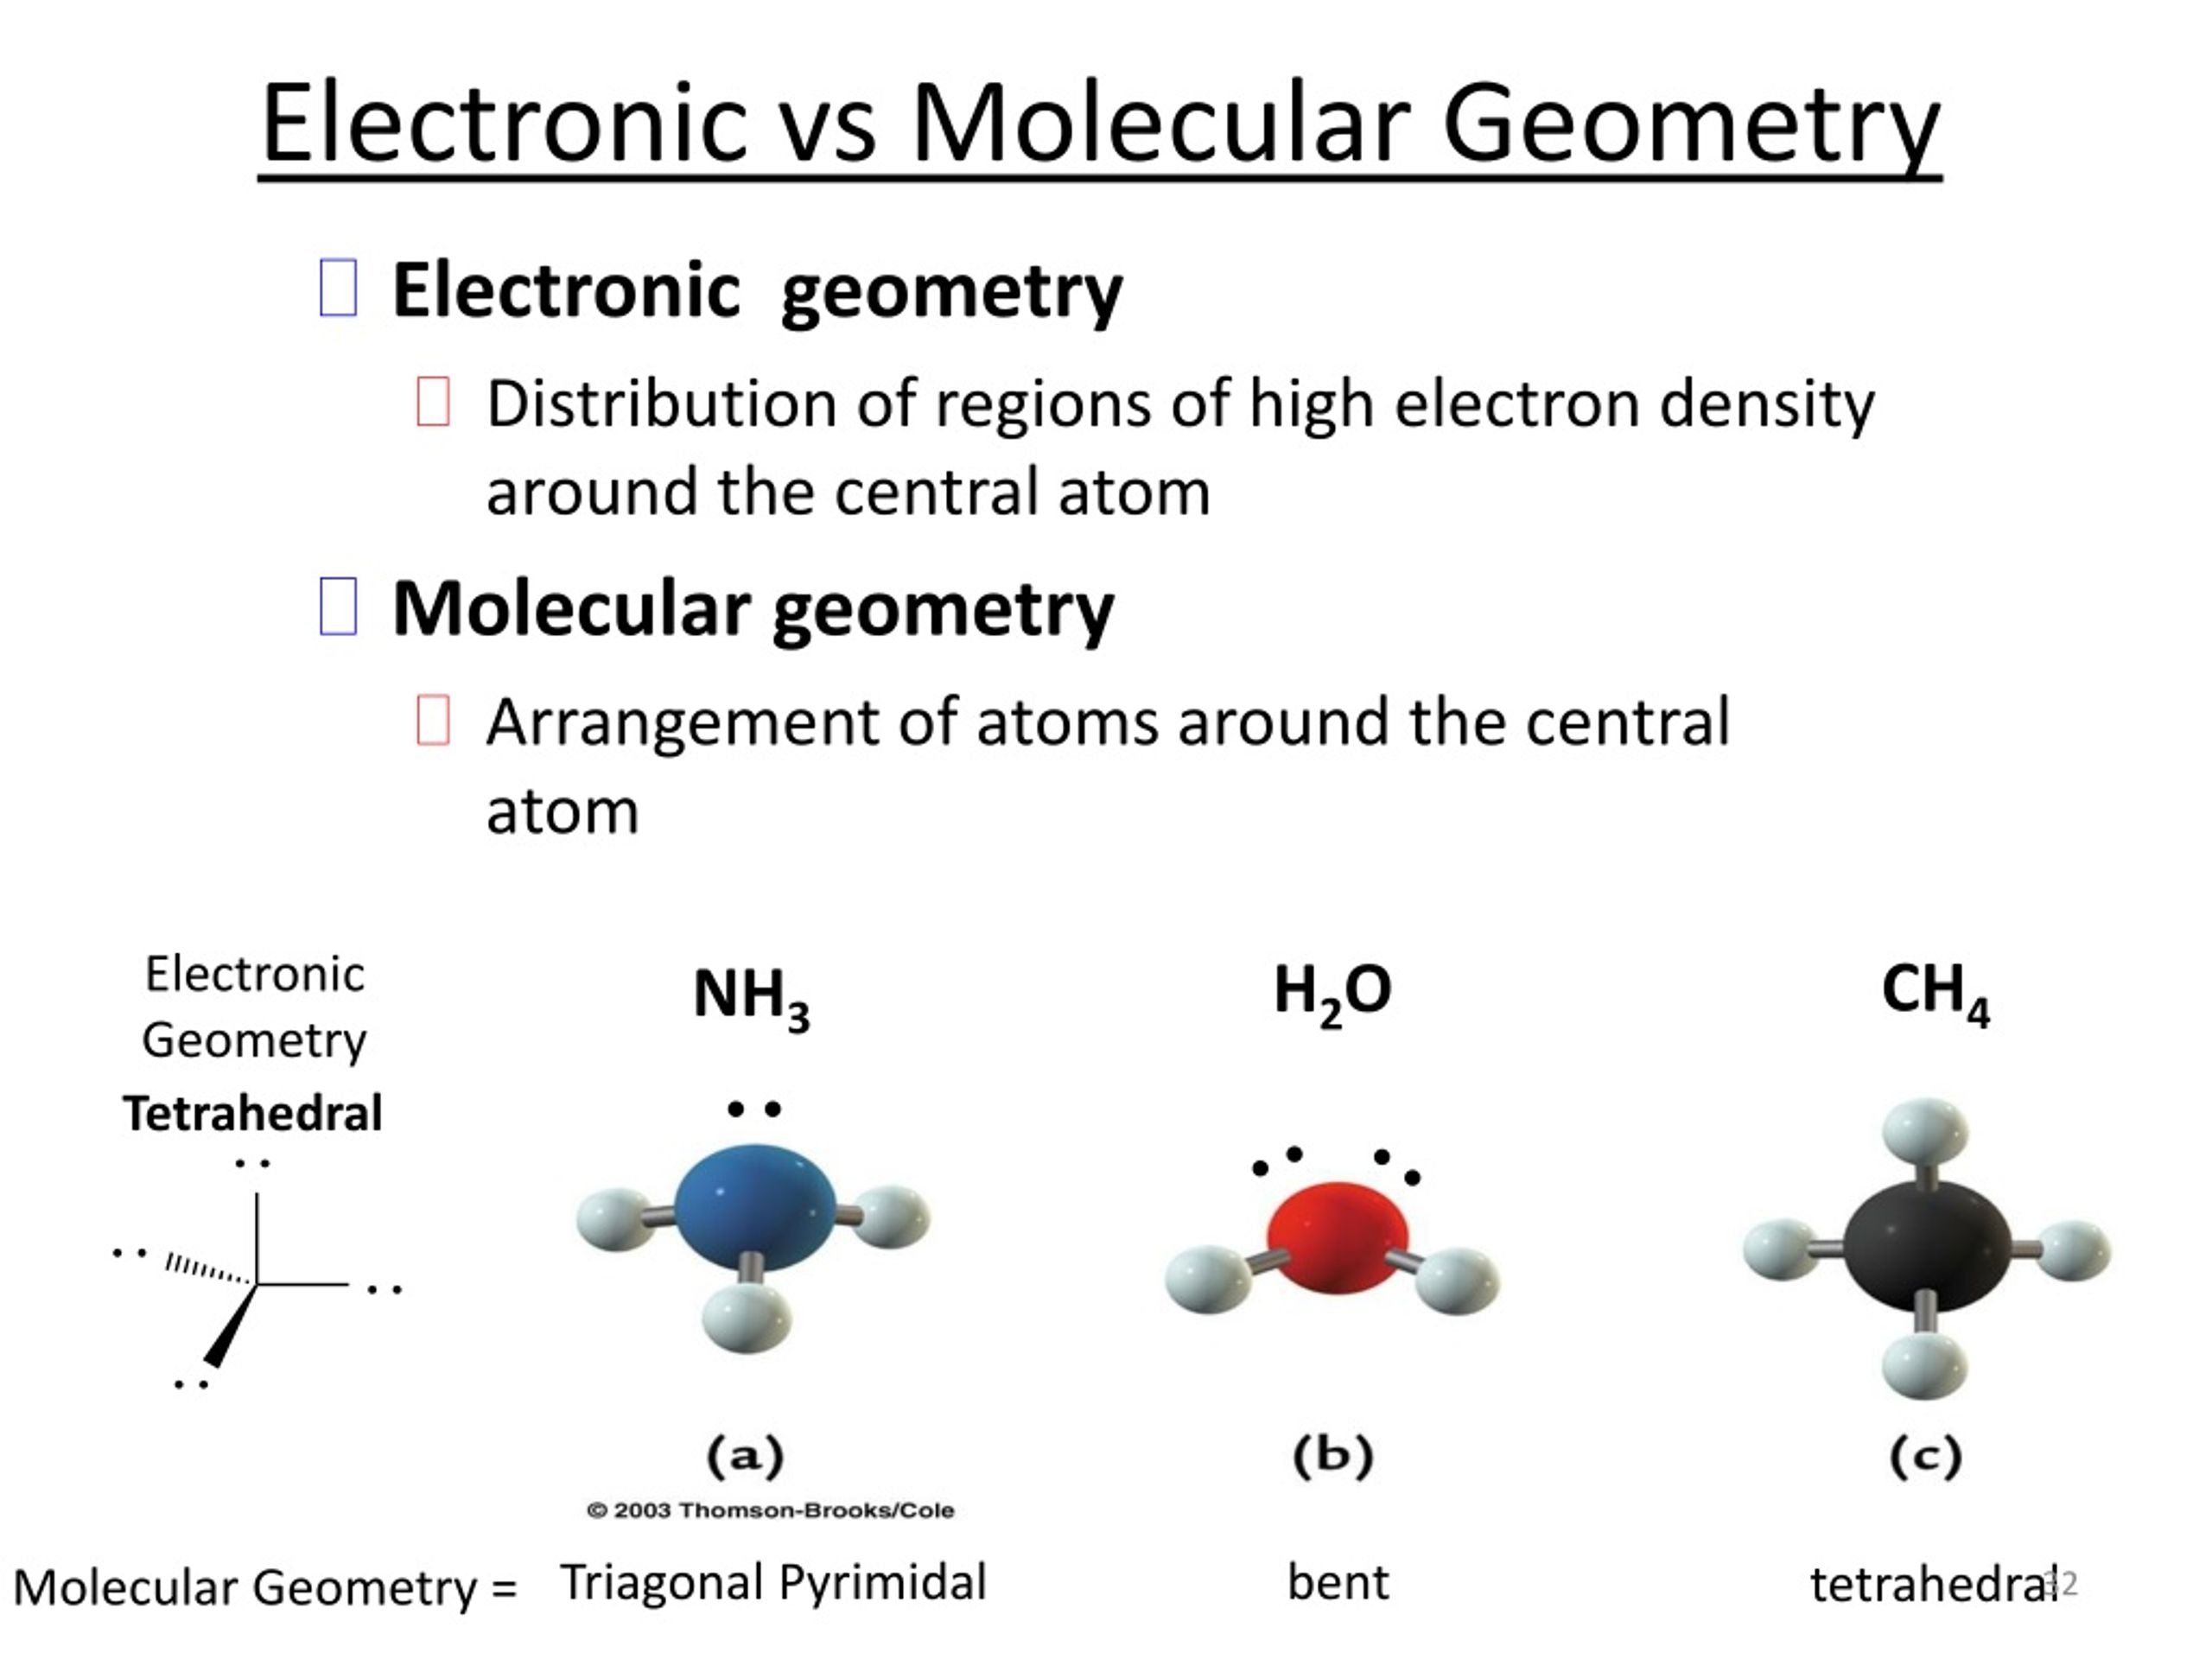 Electronic geometry * Distribution of regions of high electron density arou...